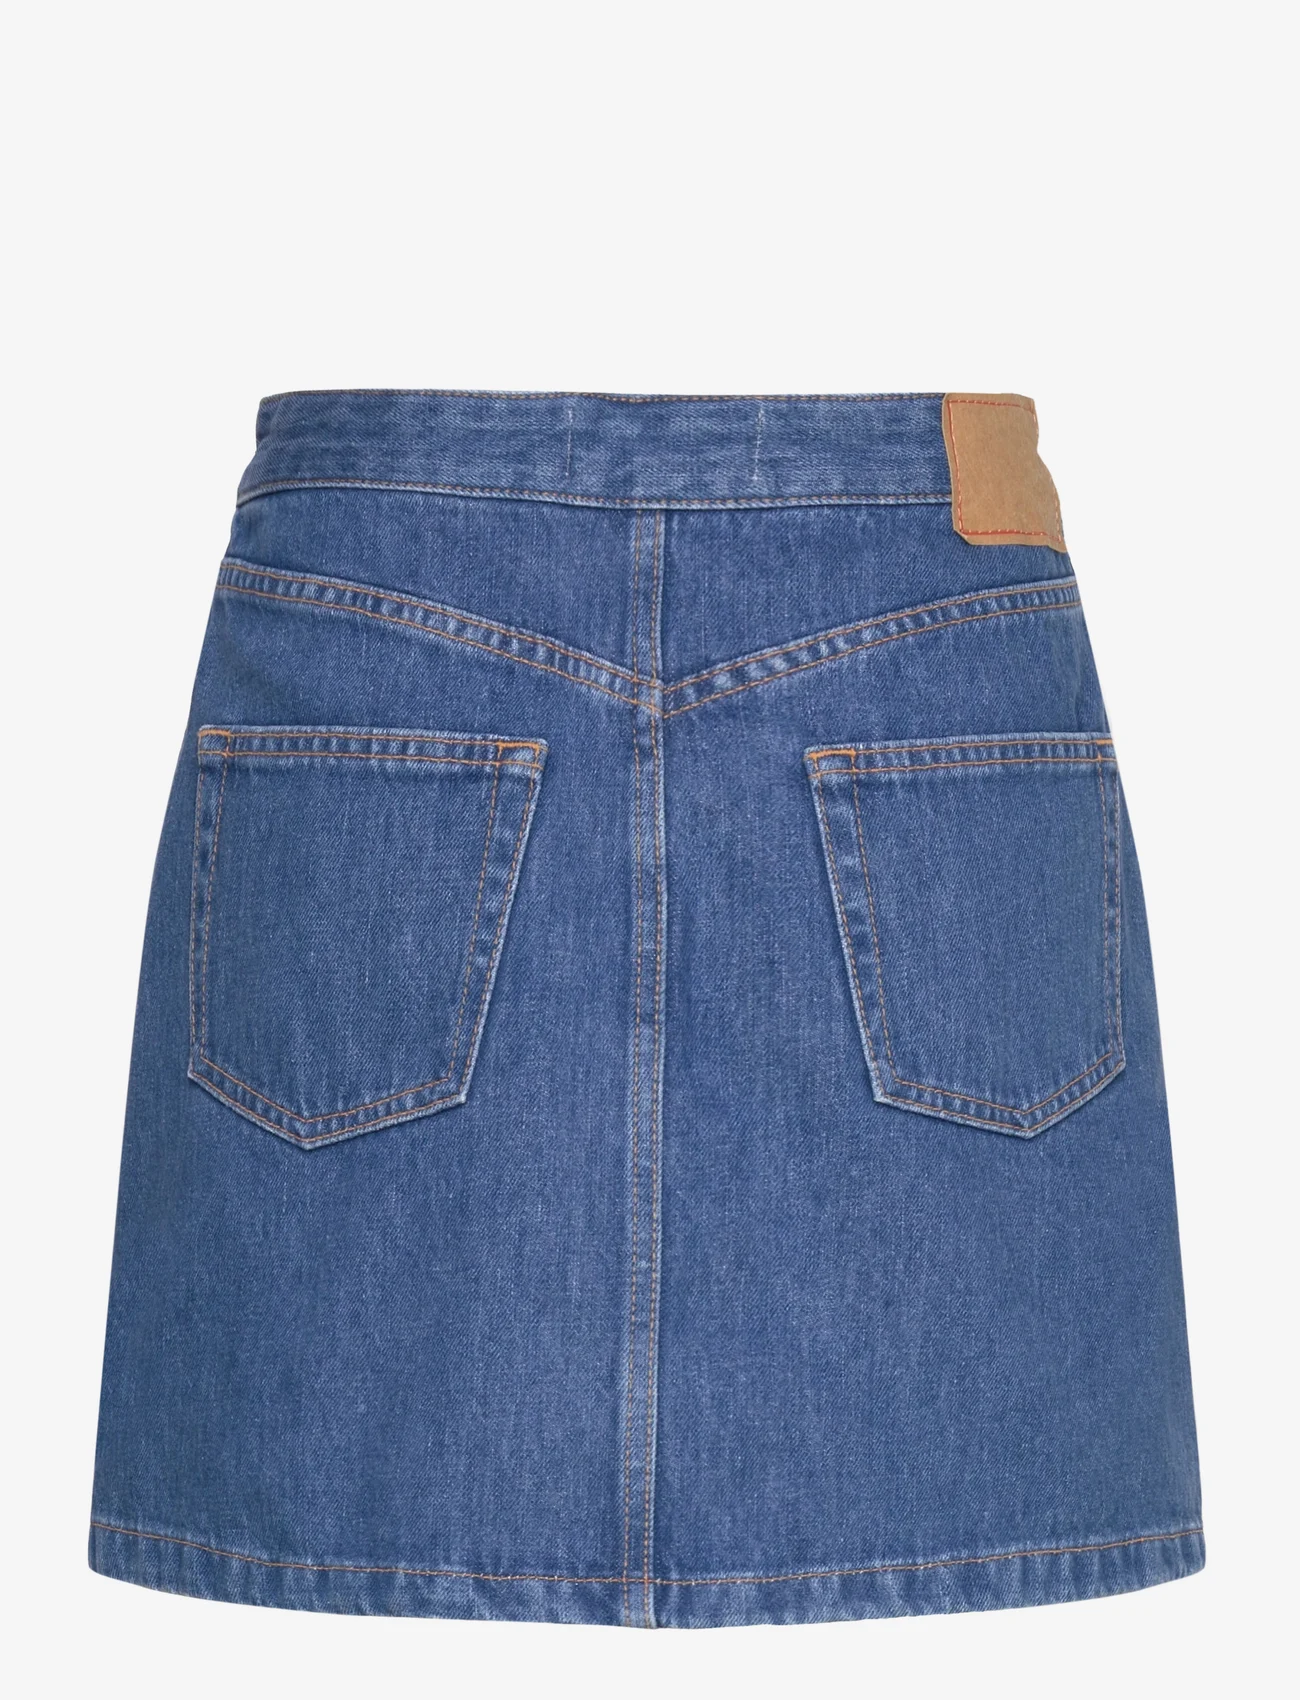 Jeanerica - Andrea - short skirts - mid blue - 1